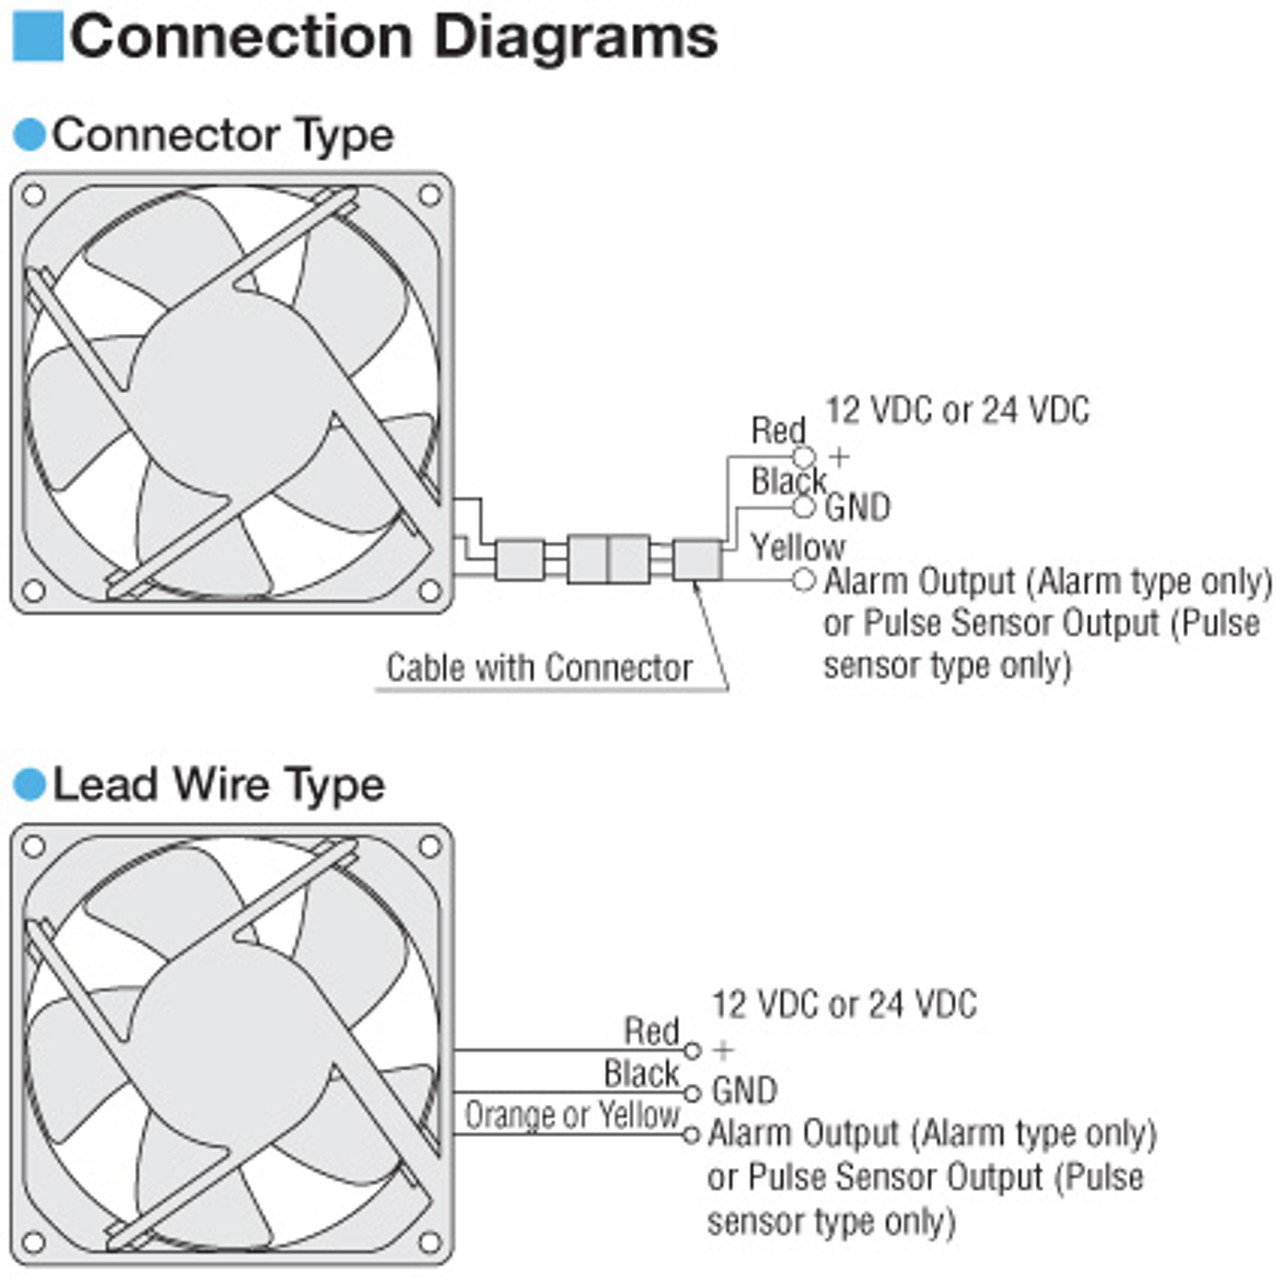 MD925A-24 - Connection